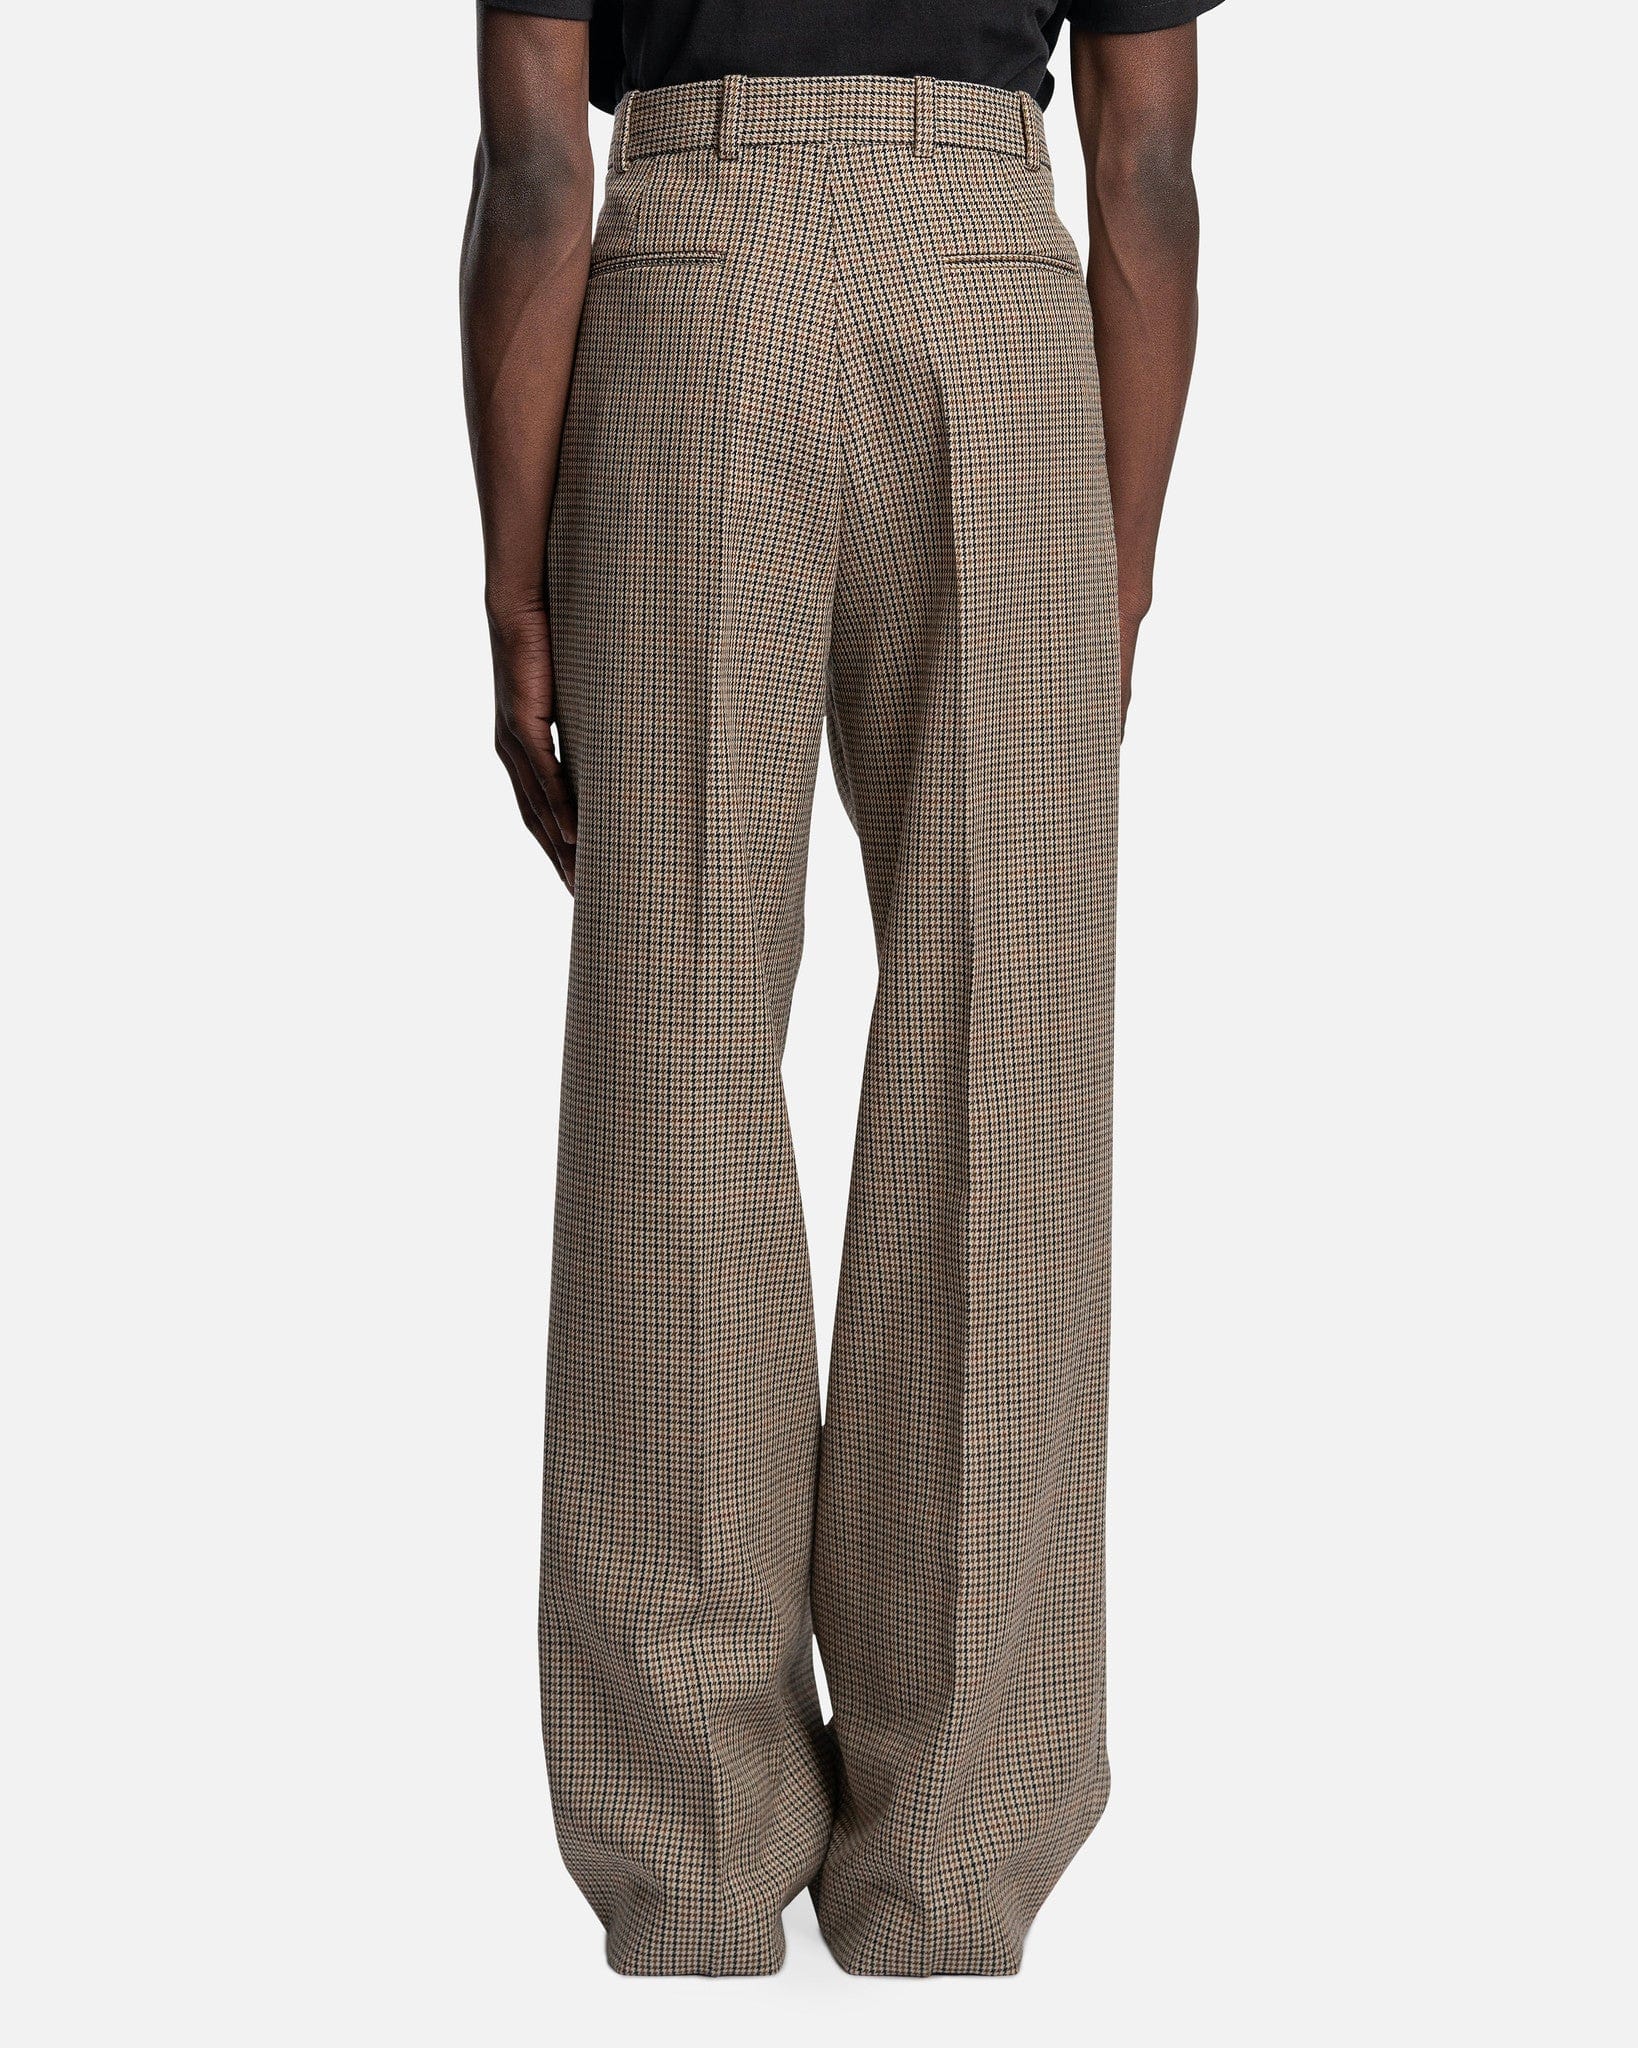 Wide Classic Trousers with Pleats in Small PDP